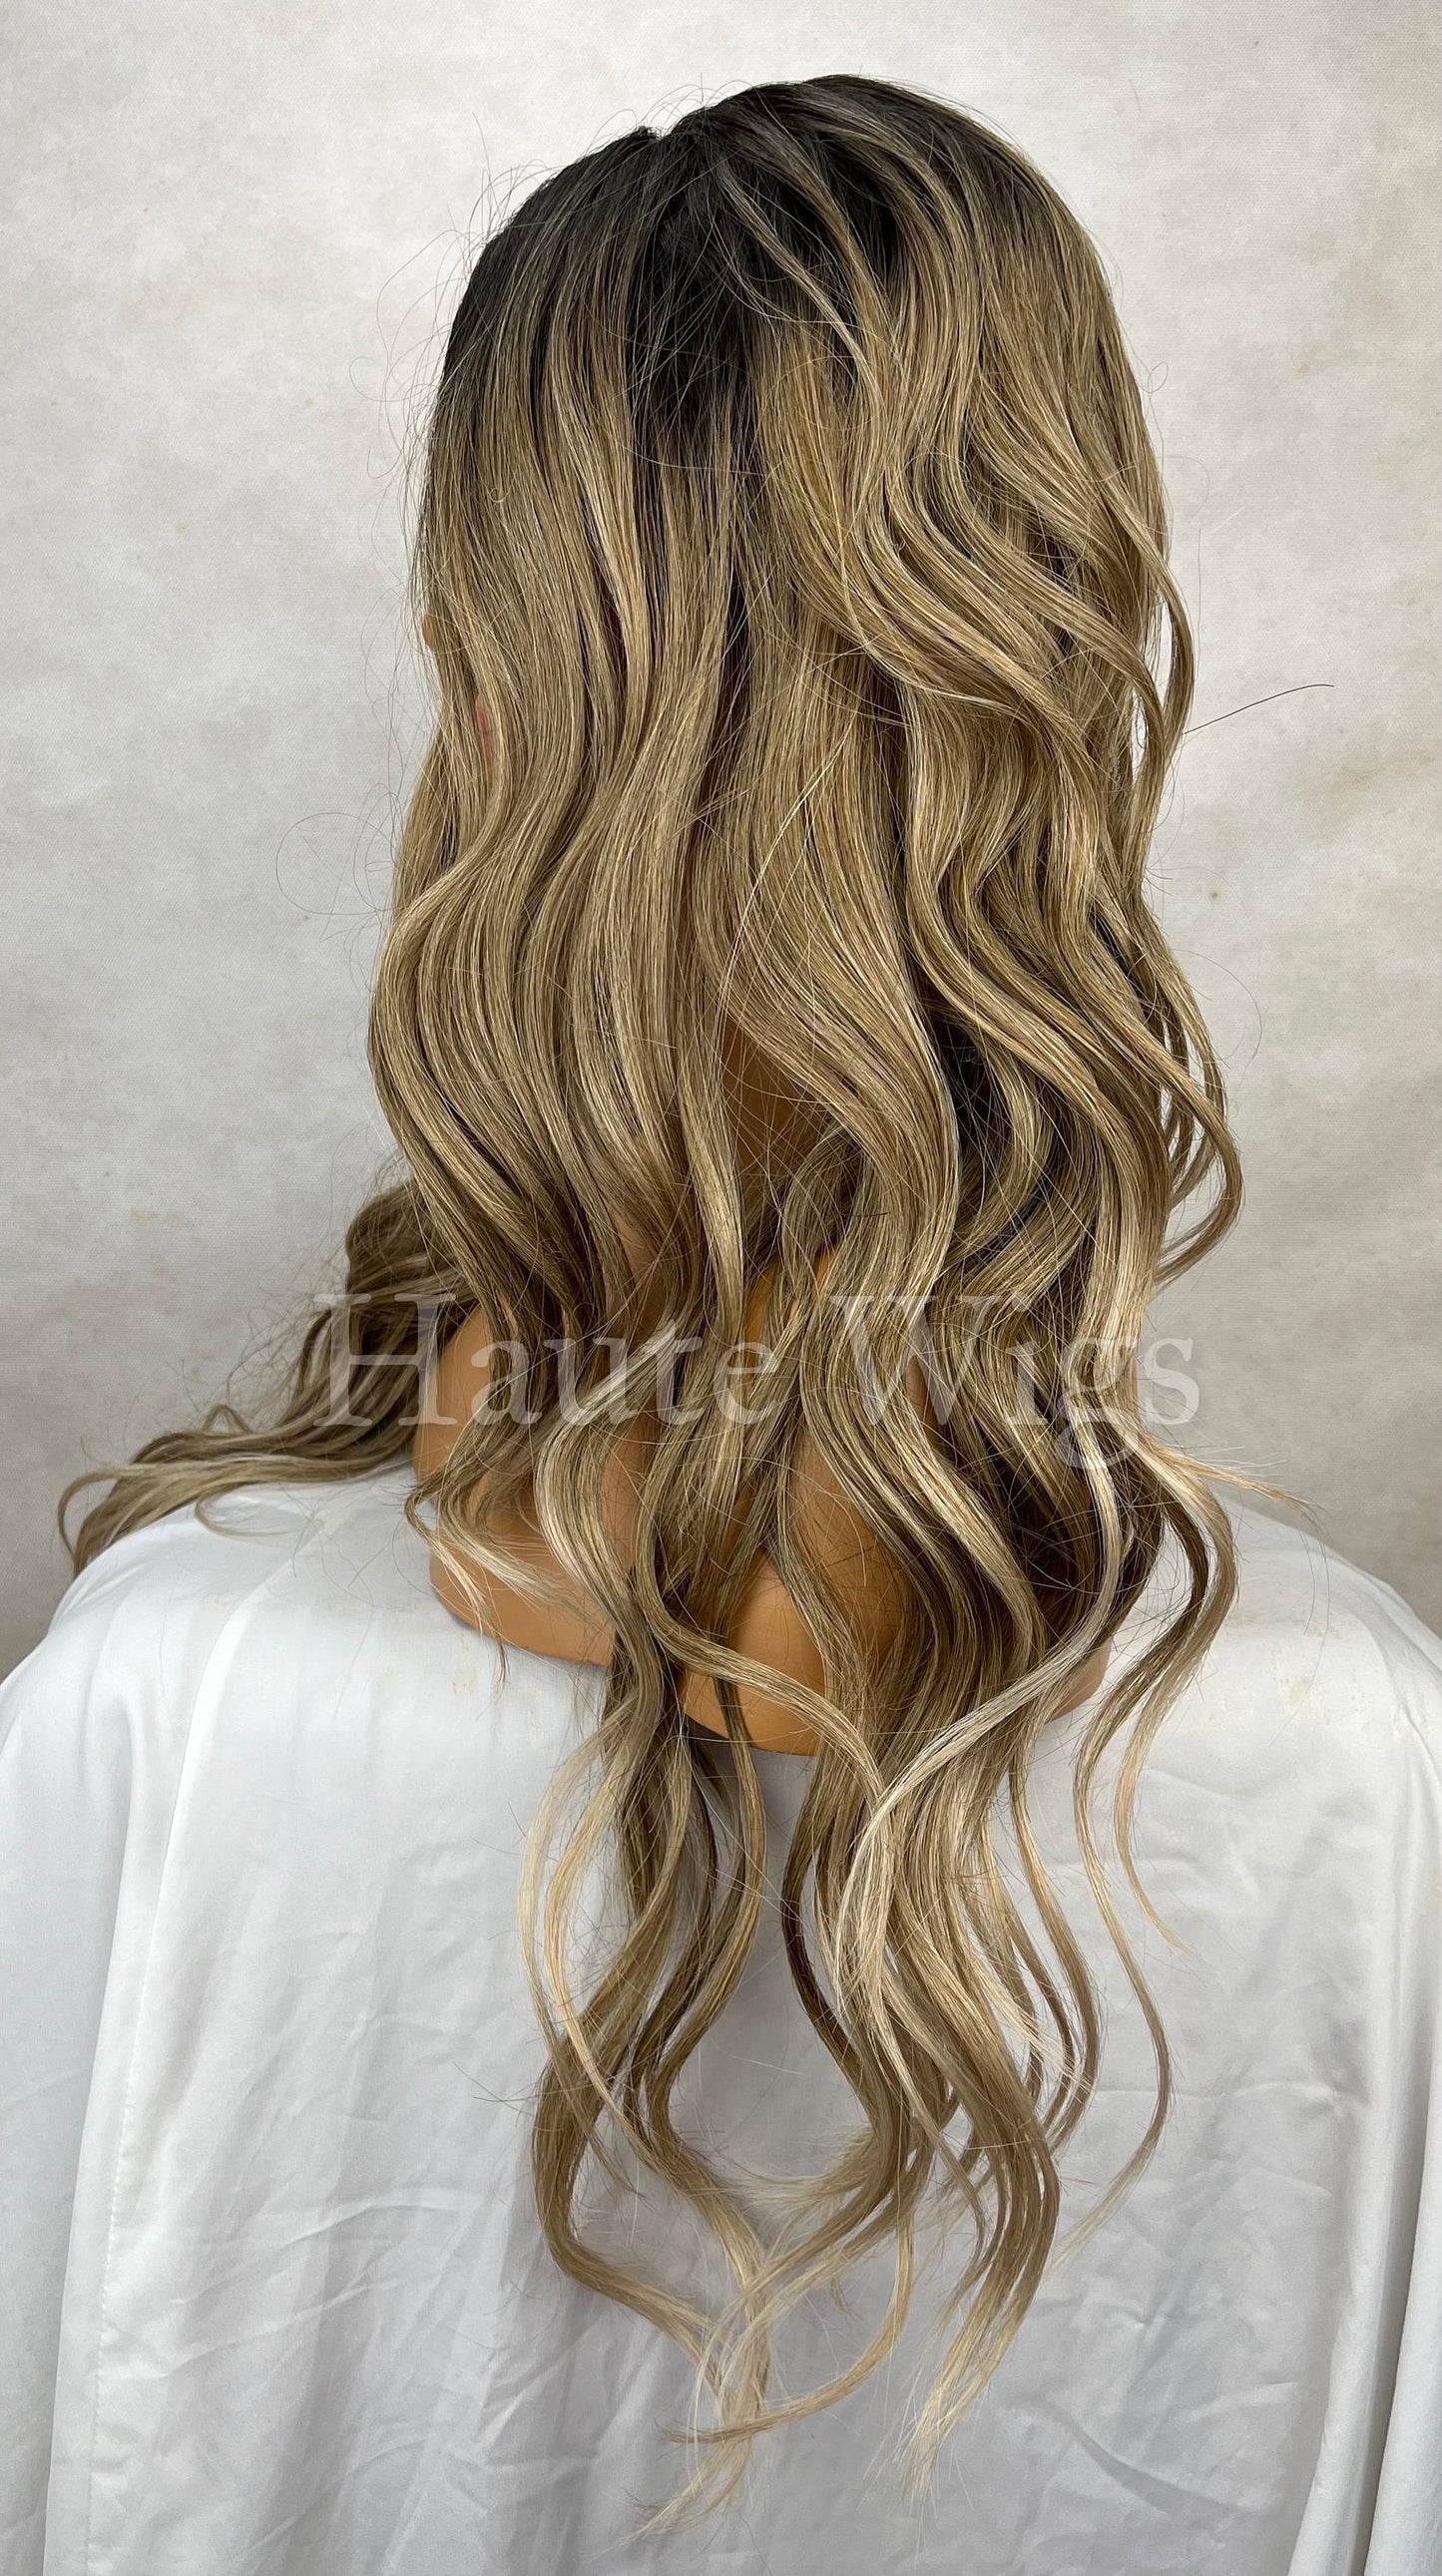 Dirty Diana - Ash Blonde Wig 28 Inch Long Womens Wigs Brown mushroom Silver Highlights Wavy Lace Front Human Hair Blends Amazing